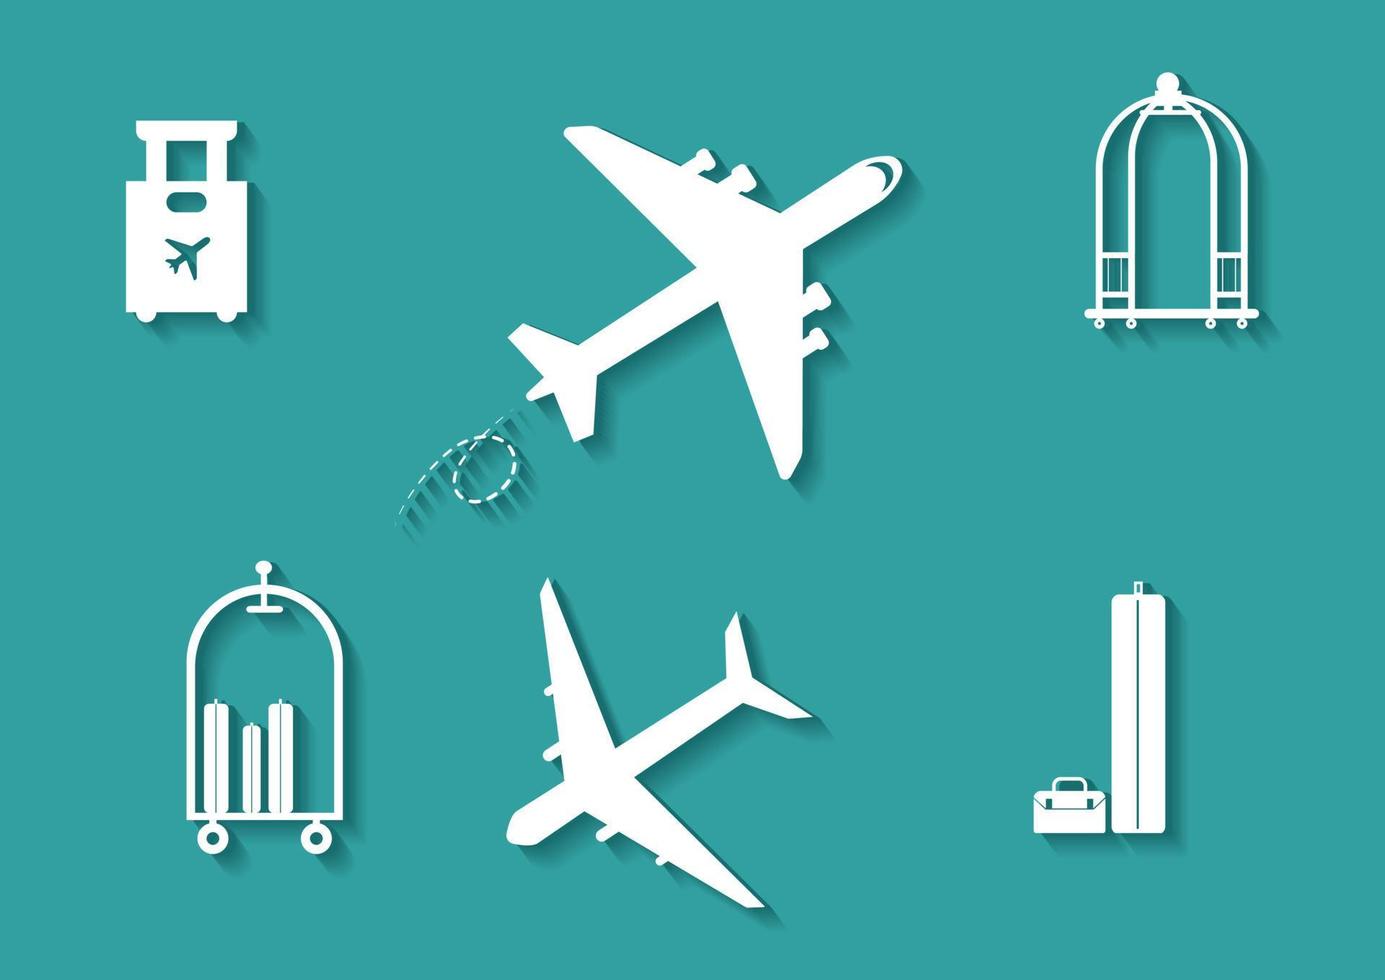 Travel icons in flat style vector illustration